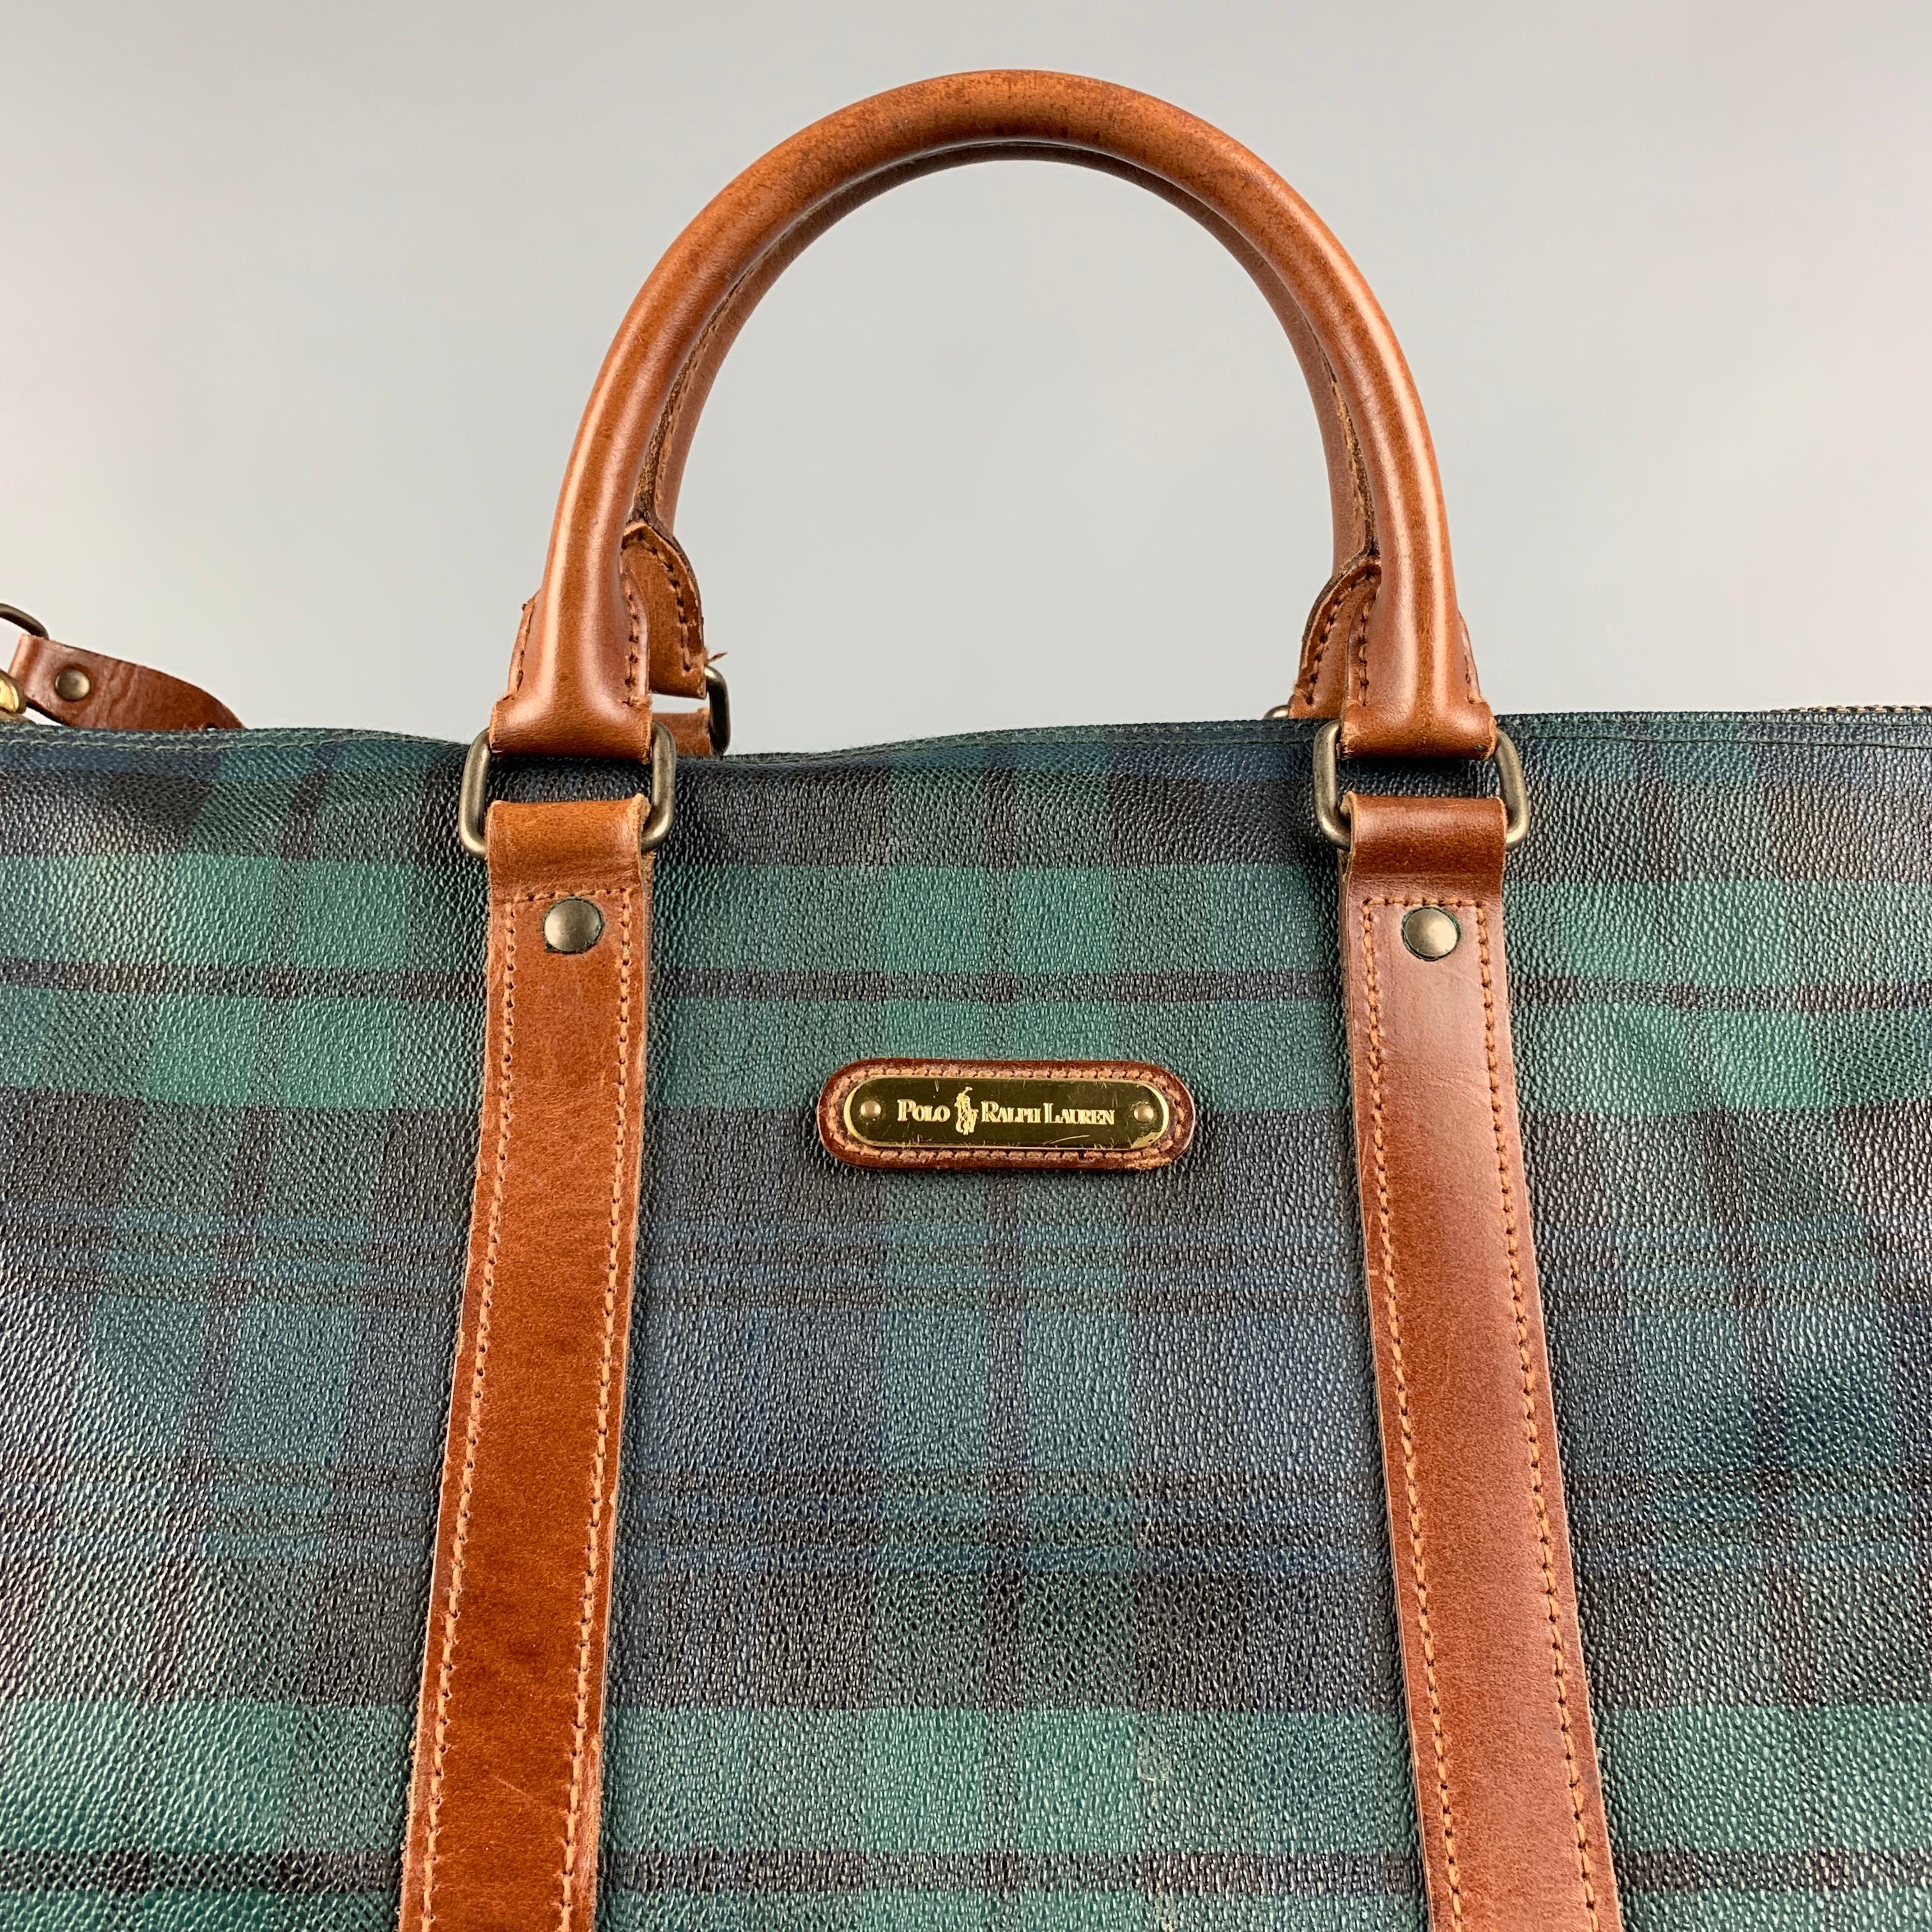 Vintage RALPH LAUREN bag comes in a green & black blackwatch coated canvas featuring a weekender style, top handles, inner compartment, top zipper closure. Missing strap. 

Good Pre-Owned Condition. Light marks throughout.

Measurements:

Length: 19